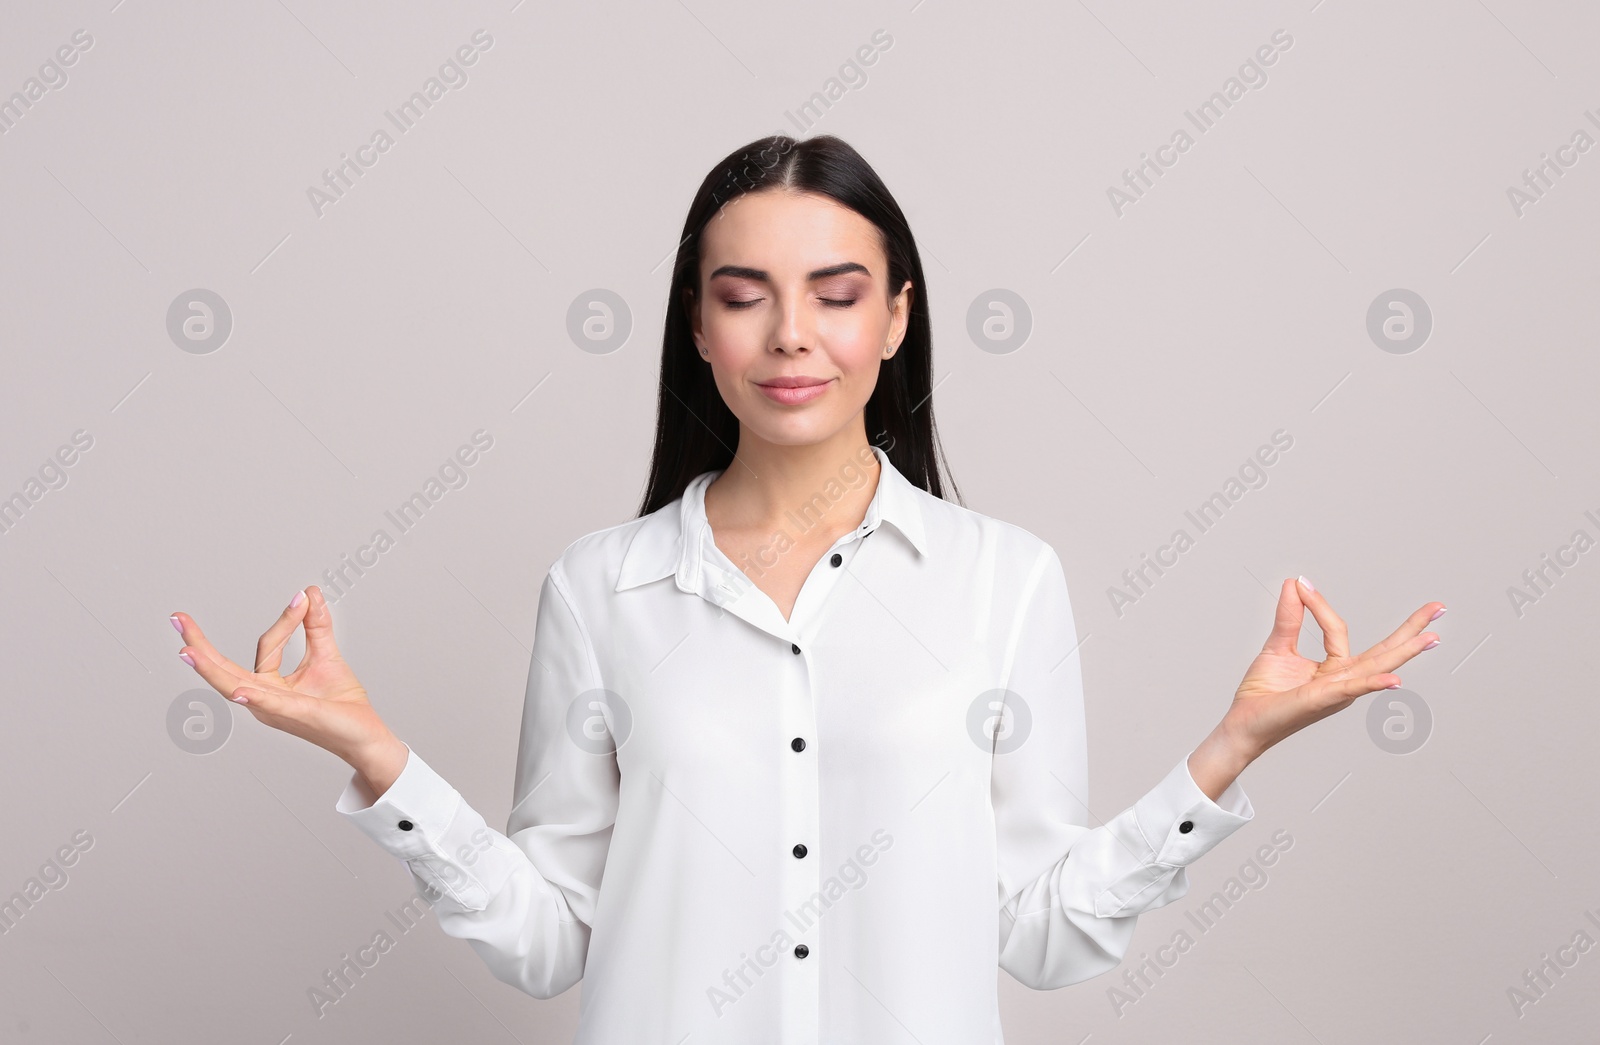 Photo of Young woman meditating on beige background. Stress relief exercise